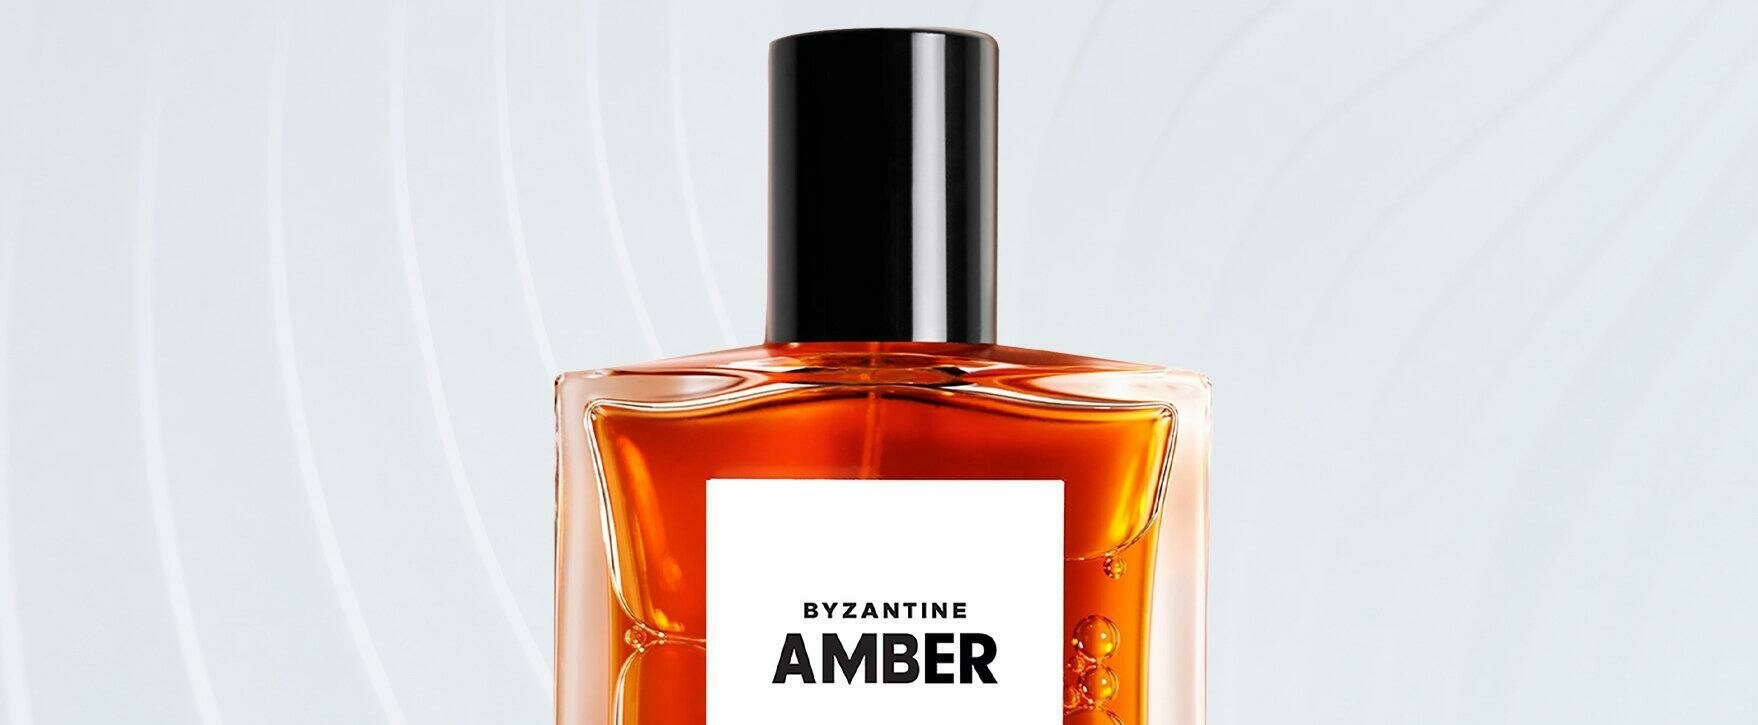 Intense and Decadent: The New Unisex Fragrance “Byzantine Amber” by Francesca Bianchi